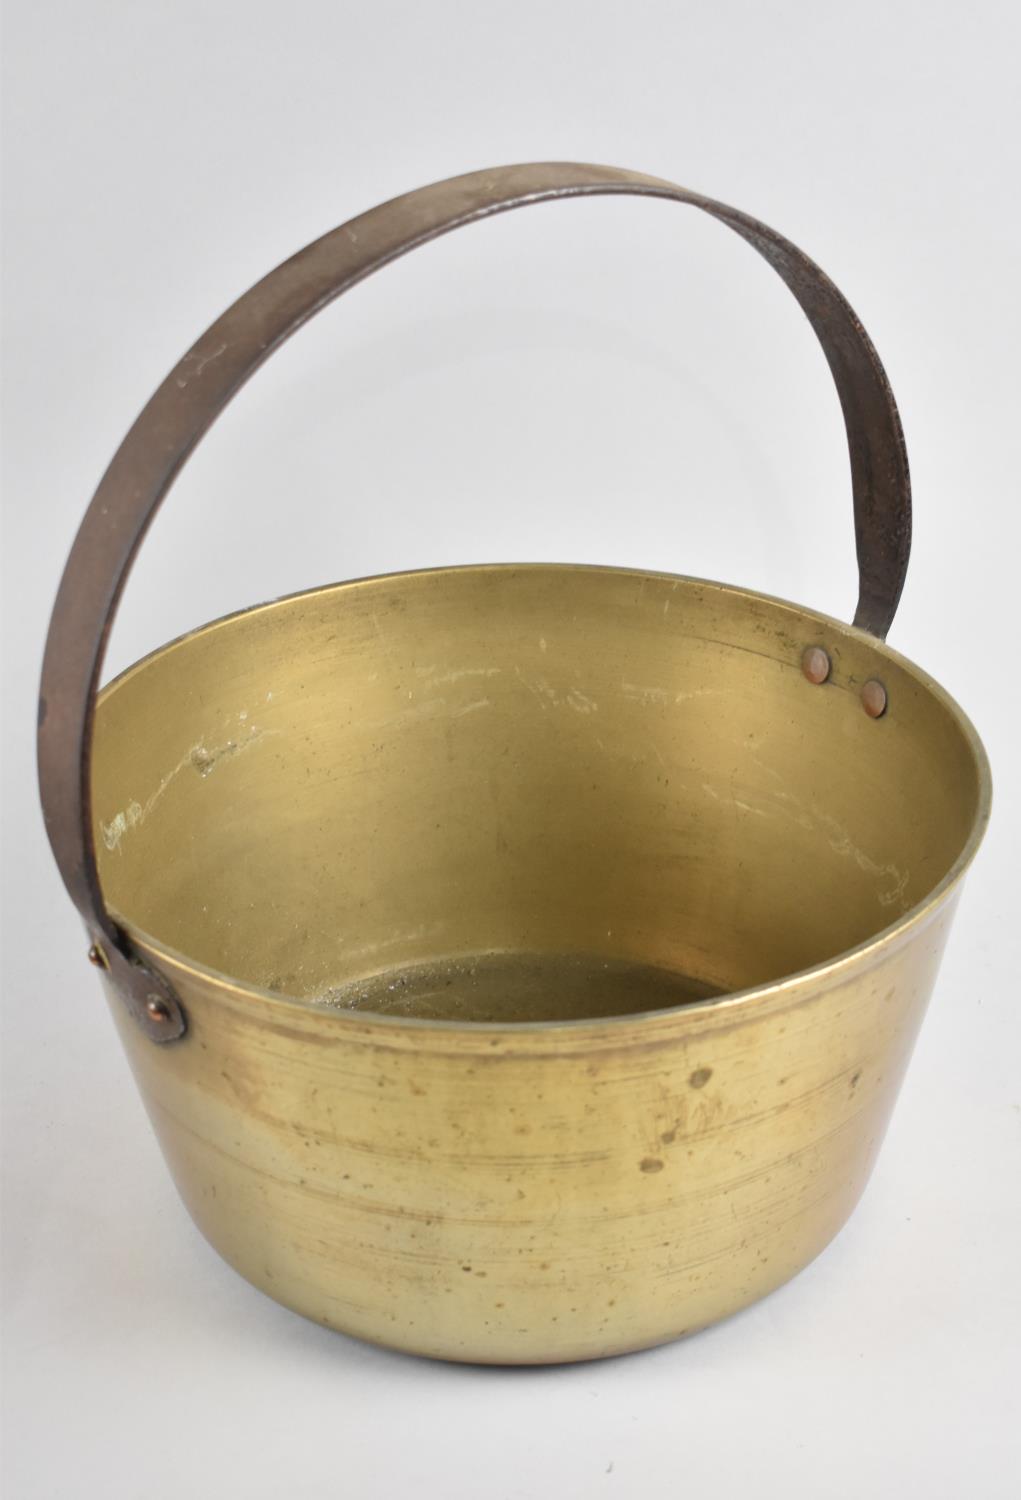 A Large Vintage Brass Jam Kettle with Iron Loop Handle, 30cm Diameter